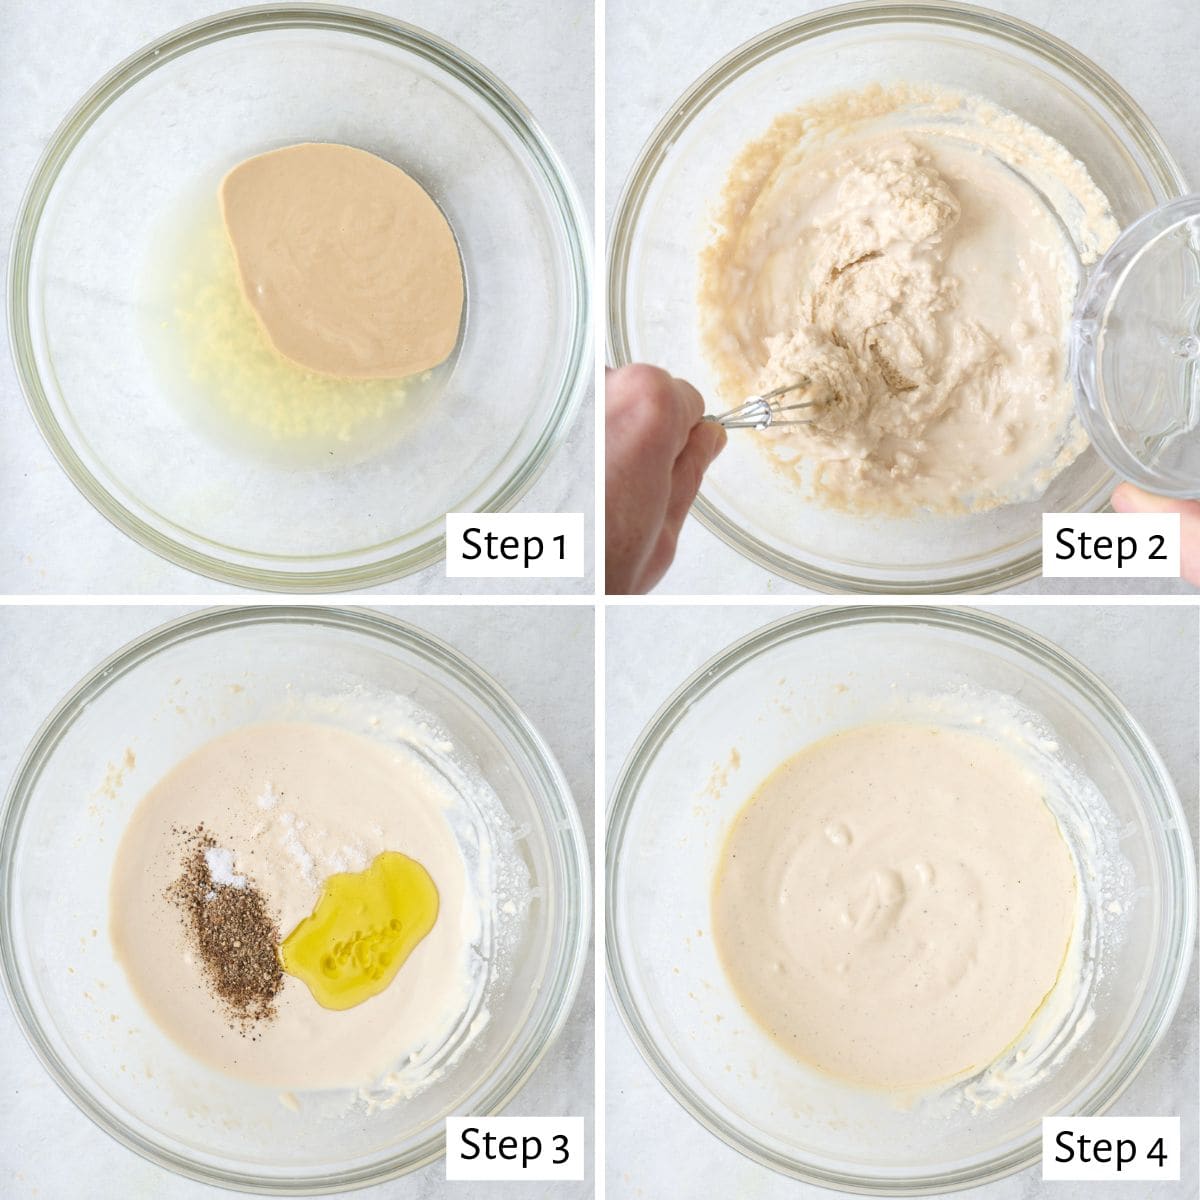 4 image collage making recipe: 1- tahini, lemon juice, and garlic in a bowl, 2- whisking together while adding water, 3- seasoning and oil added before mixing, 4- after mixing.